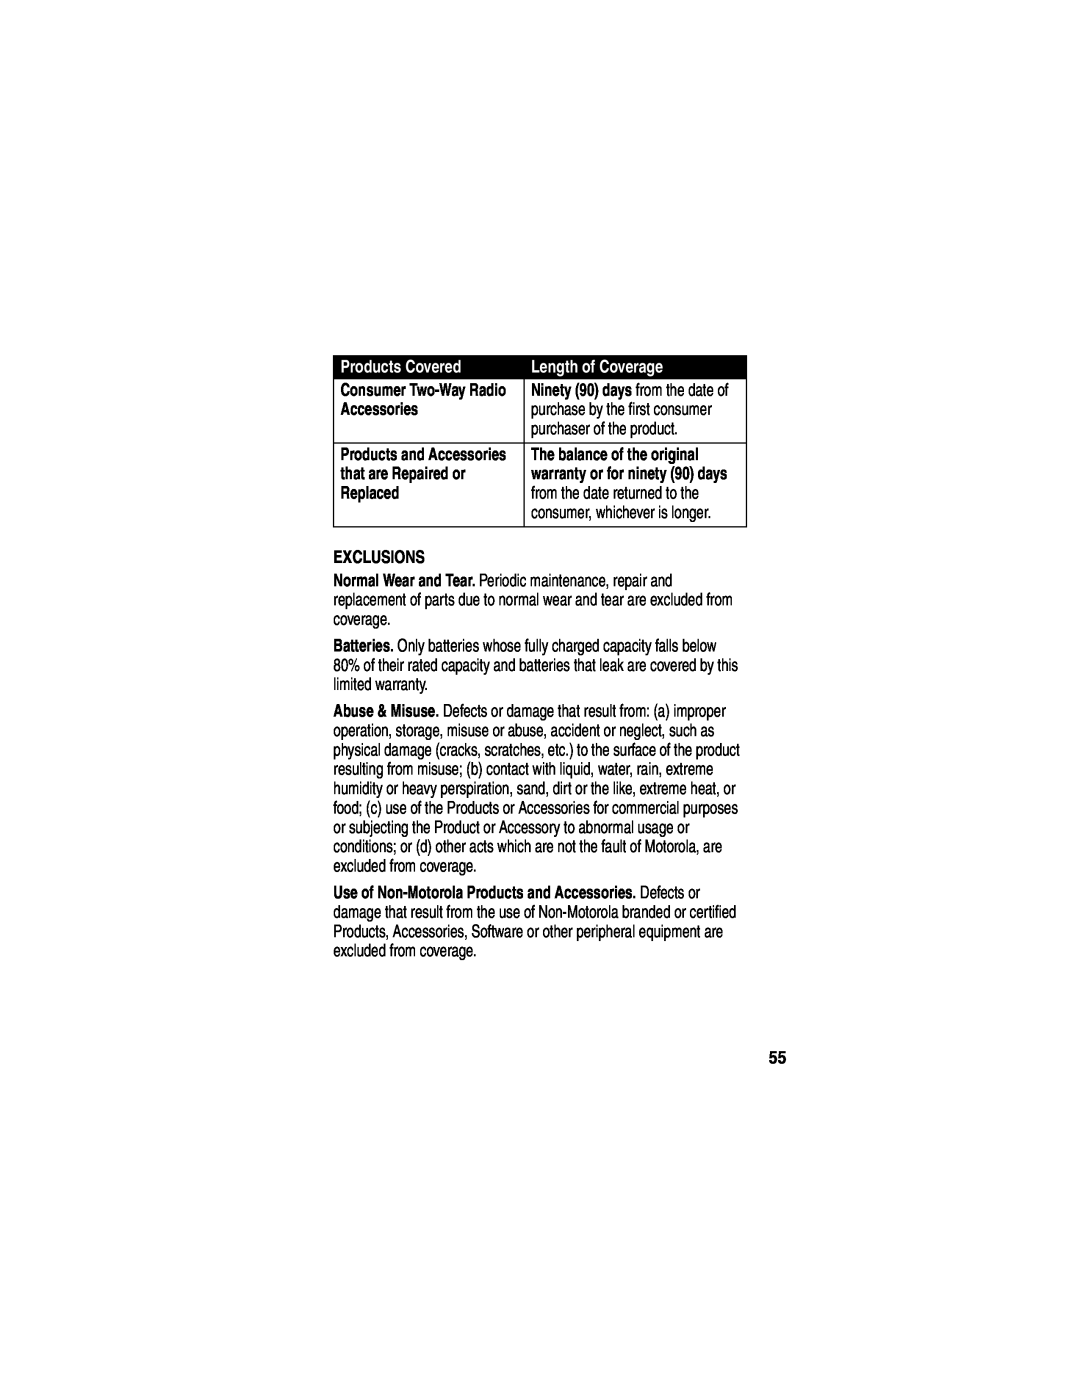 Motorola MD490 manual Accessories, purchaser of the product, that are Repaired or, Replaced, Exclusions, Products Covered 